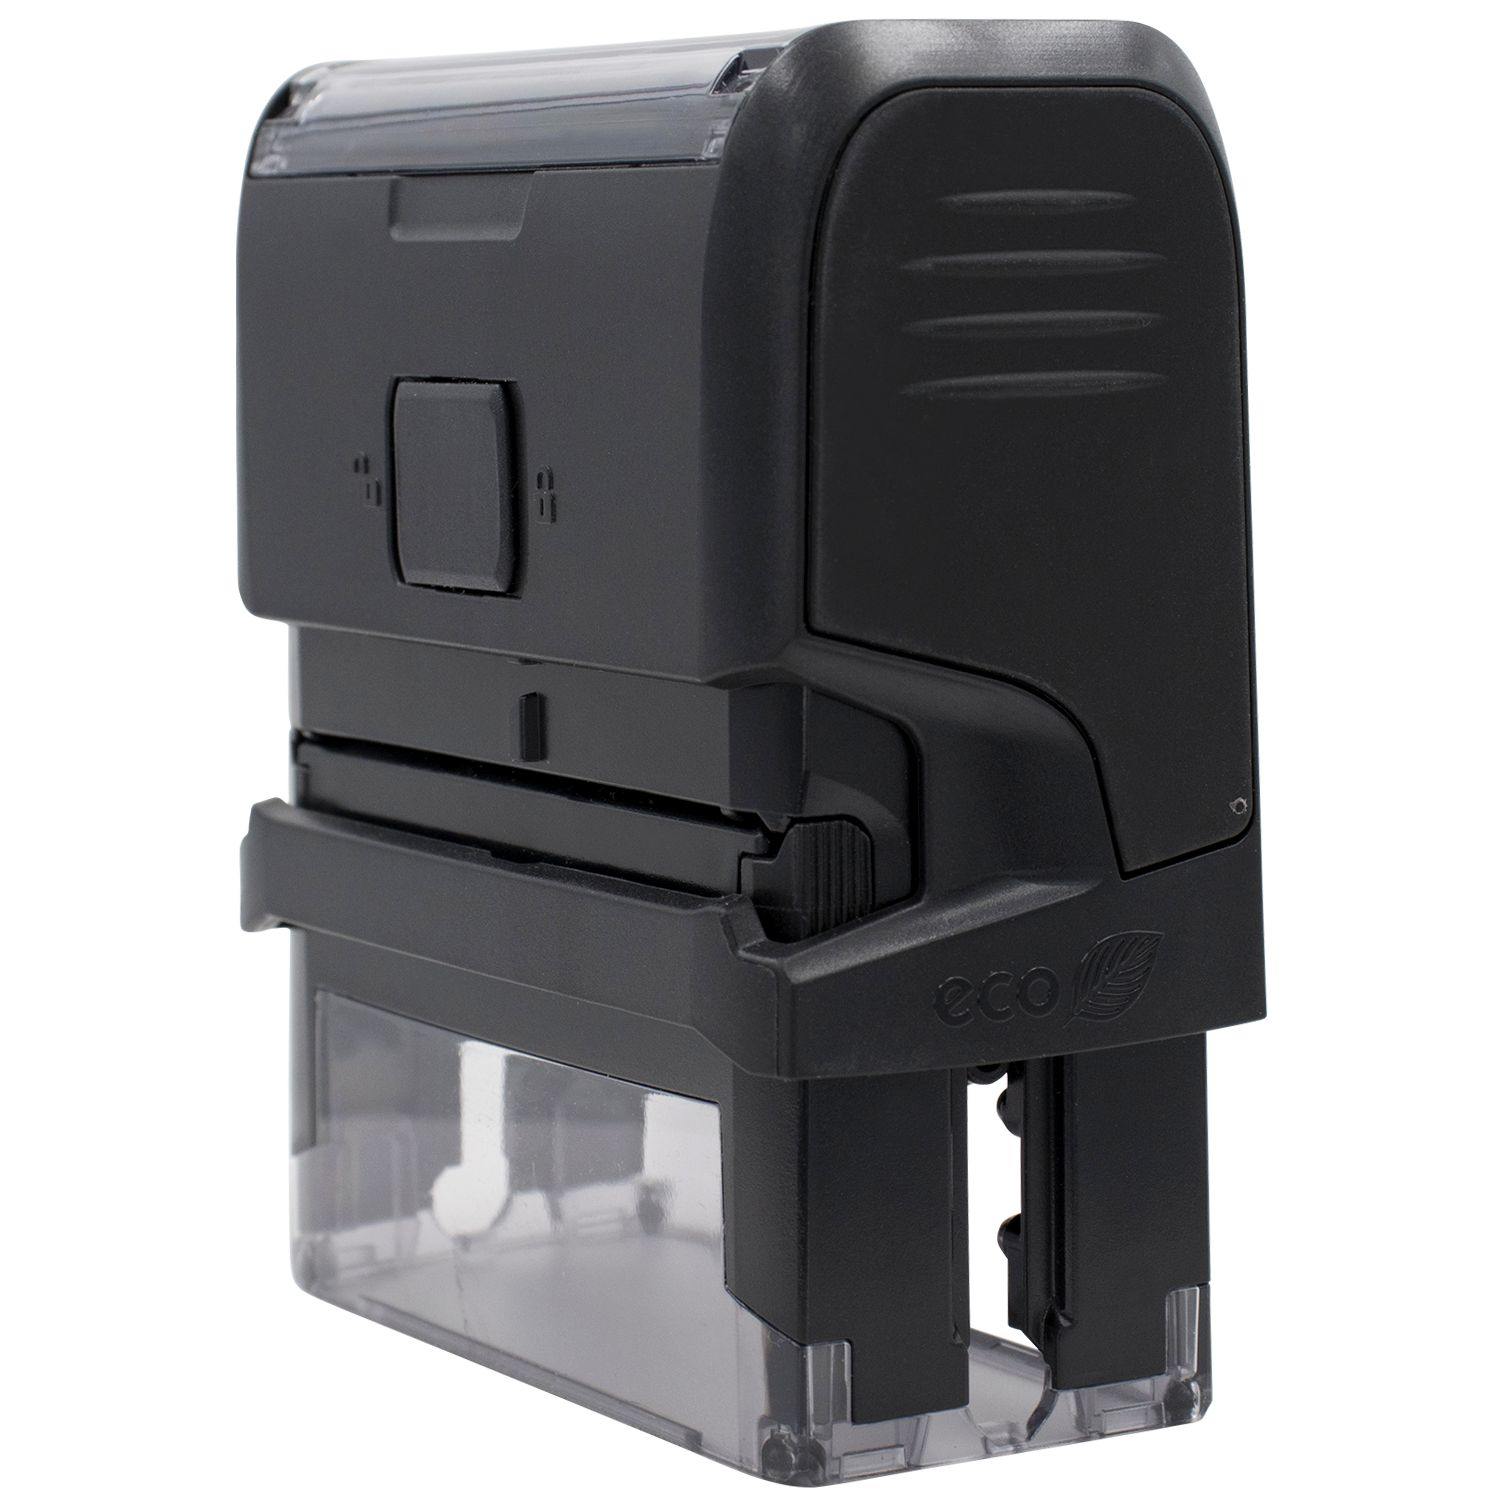 Large Self-Inking Entered with Date Box Stamp - Engineer Seal Stamps - Brand_Trodat, Impression Size_Large, Stamp Type_Self-Inking Stamp